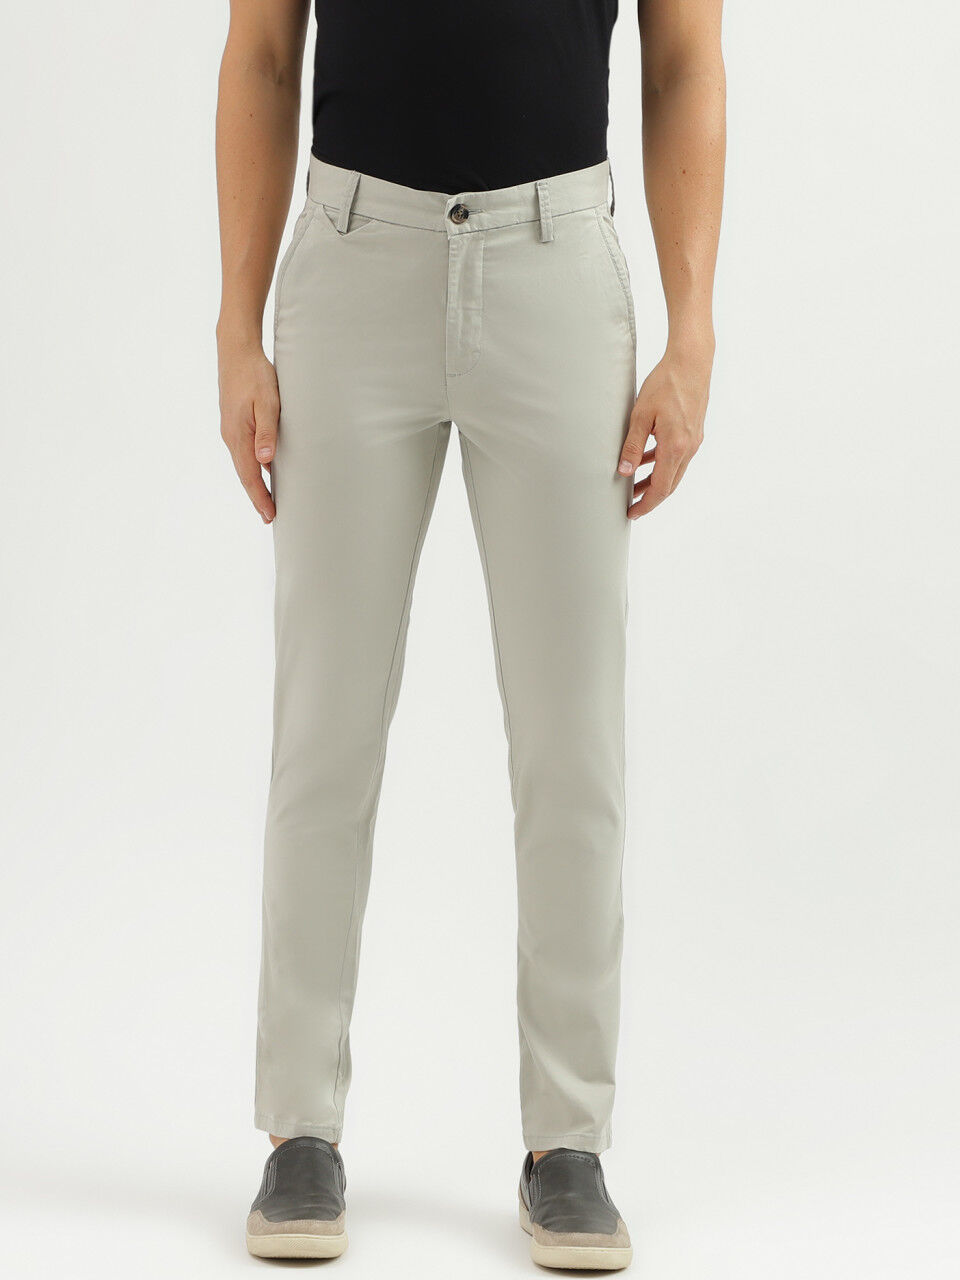 United Colors Of Benetton Mens Trousers - Buy United Colors Of Benetton  Mens Trousers Online at Best Prices In India | Flipkart.com